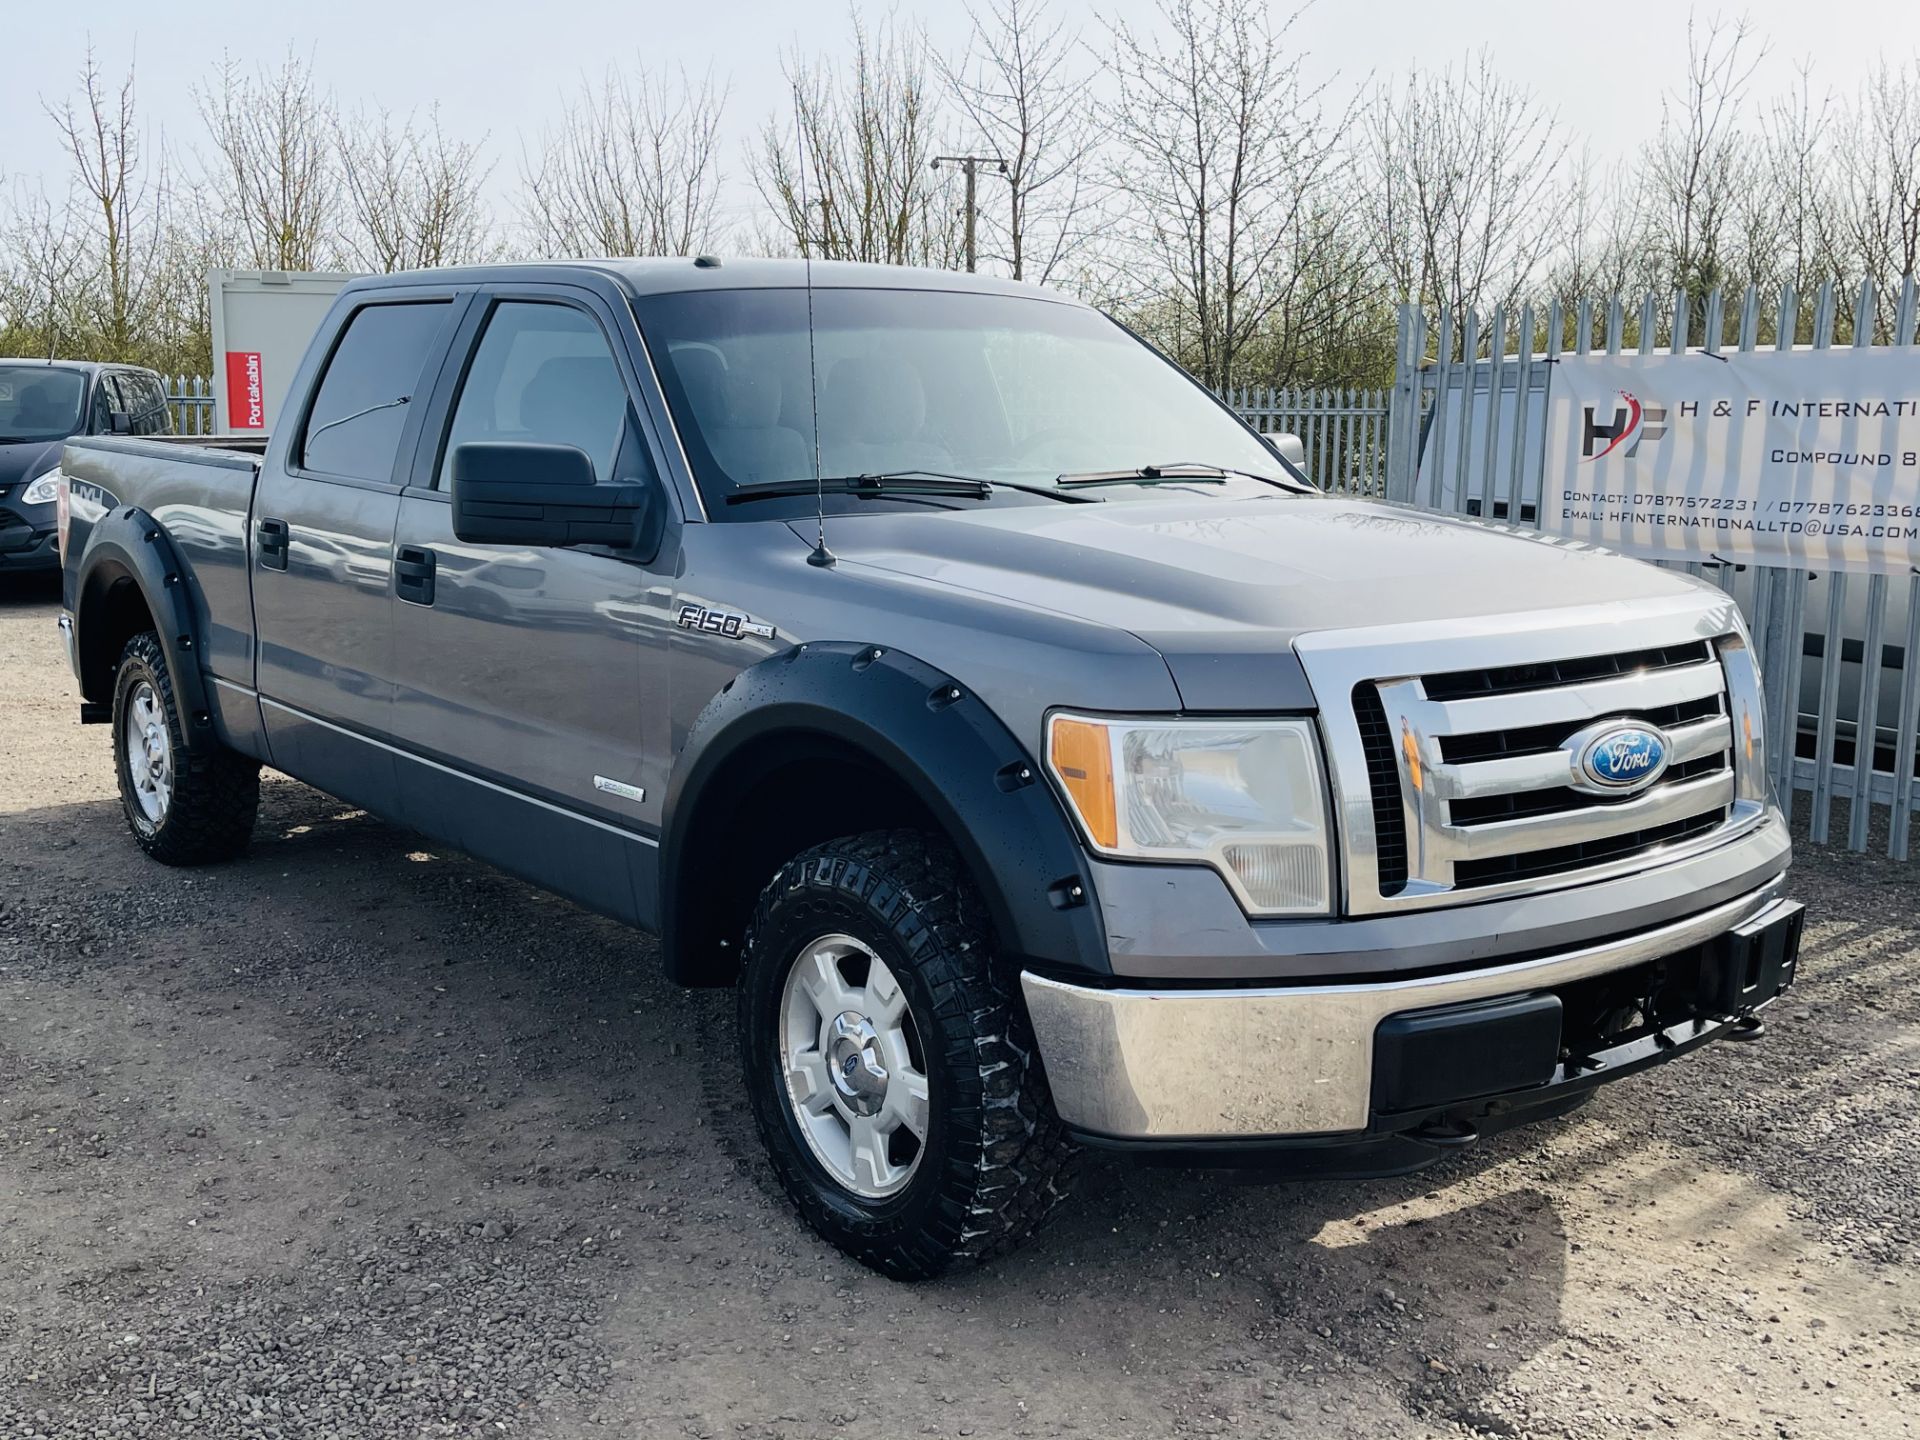 Ford F-150 XLT 3.5L V6 Ecoboost 'Super-Crew' 4WD - '2012 Year' Air con** NO VAT SAVE 20%**